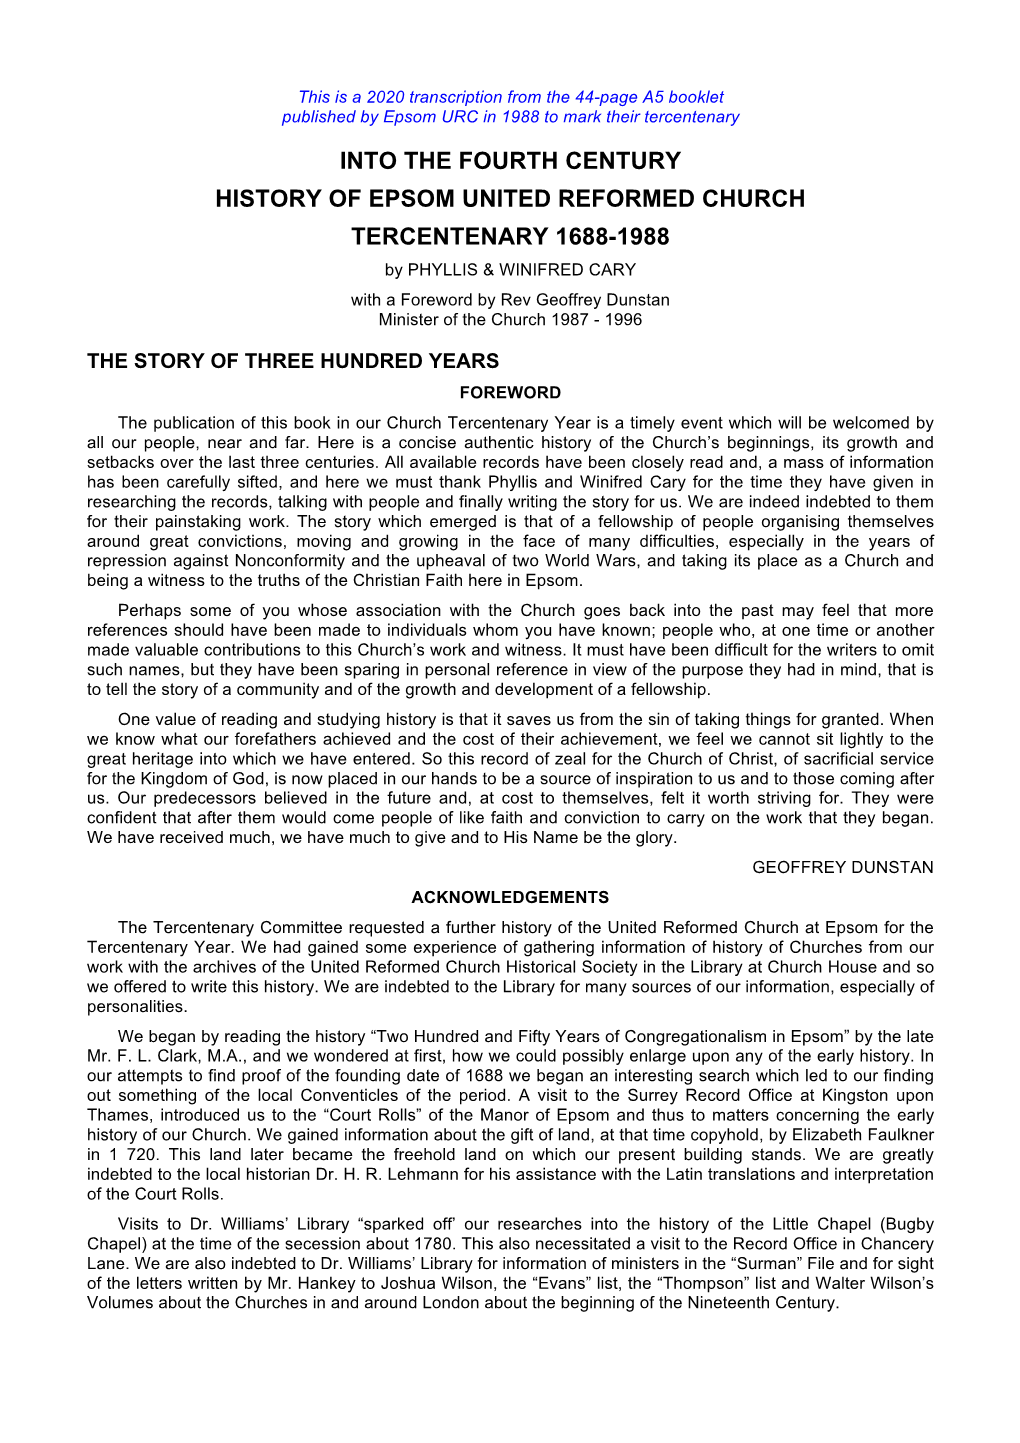 HISTORY of EPSOM UNITED REFORMED CHURCH TERCENTENARY 1688-1988 by PHYLLIS & WINIFRED CARY with a Foreword by Rev Geoffrey Dunstan Minister of the Church 1987 - 1996